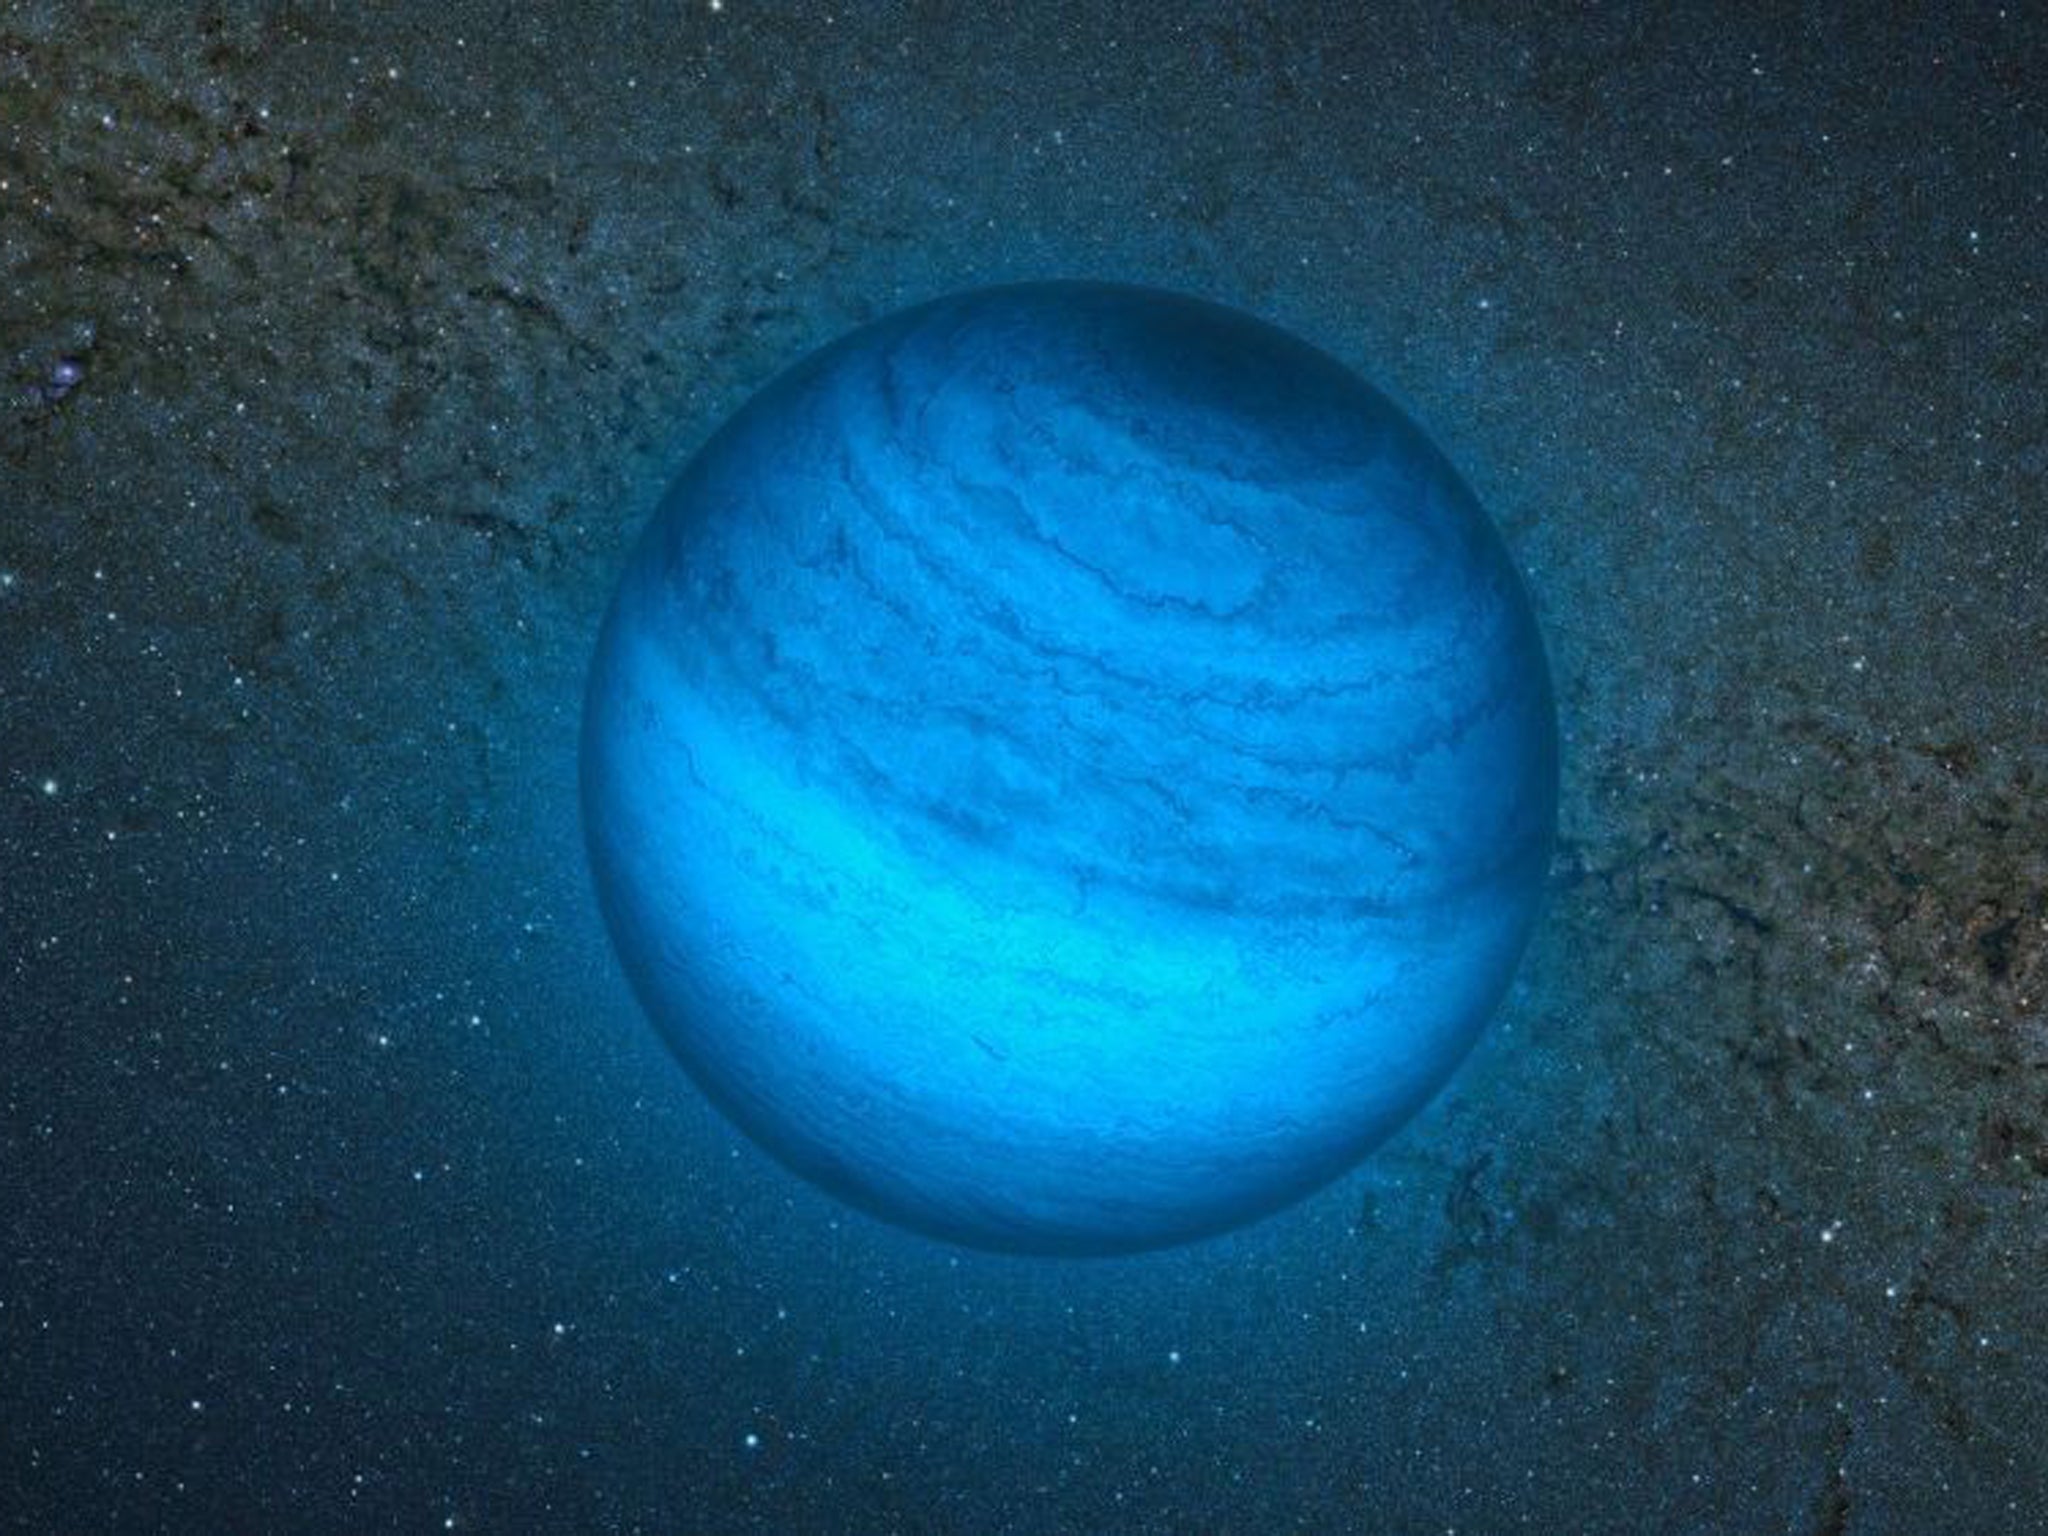 CFBDSIR2149 is about four to seven times the mass of Jupiter and is passing through space at the relatively close distance of 100 light years from our own Solar System